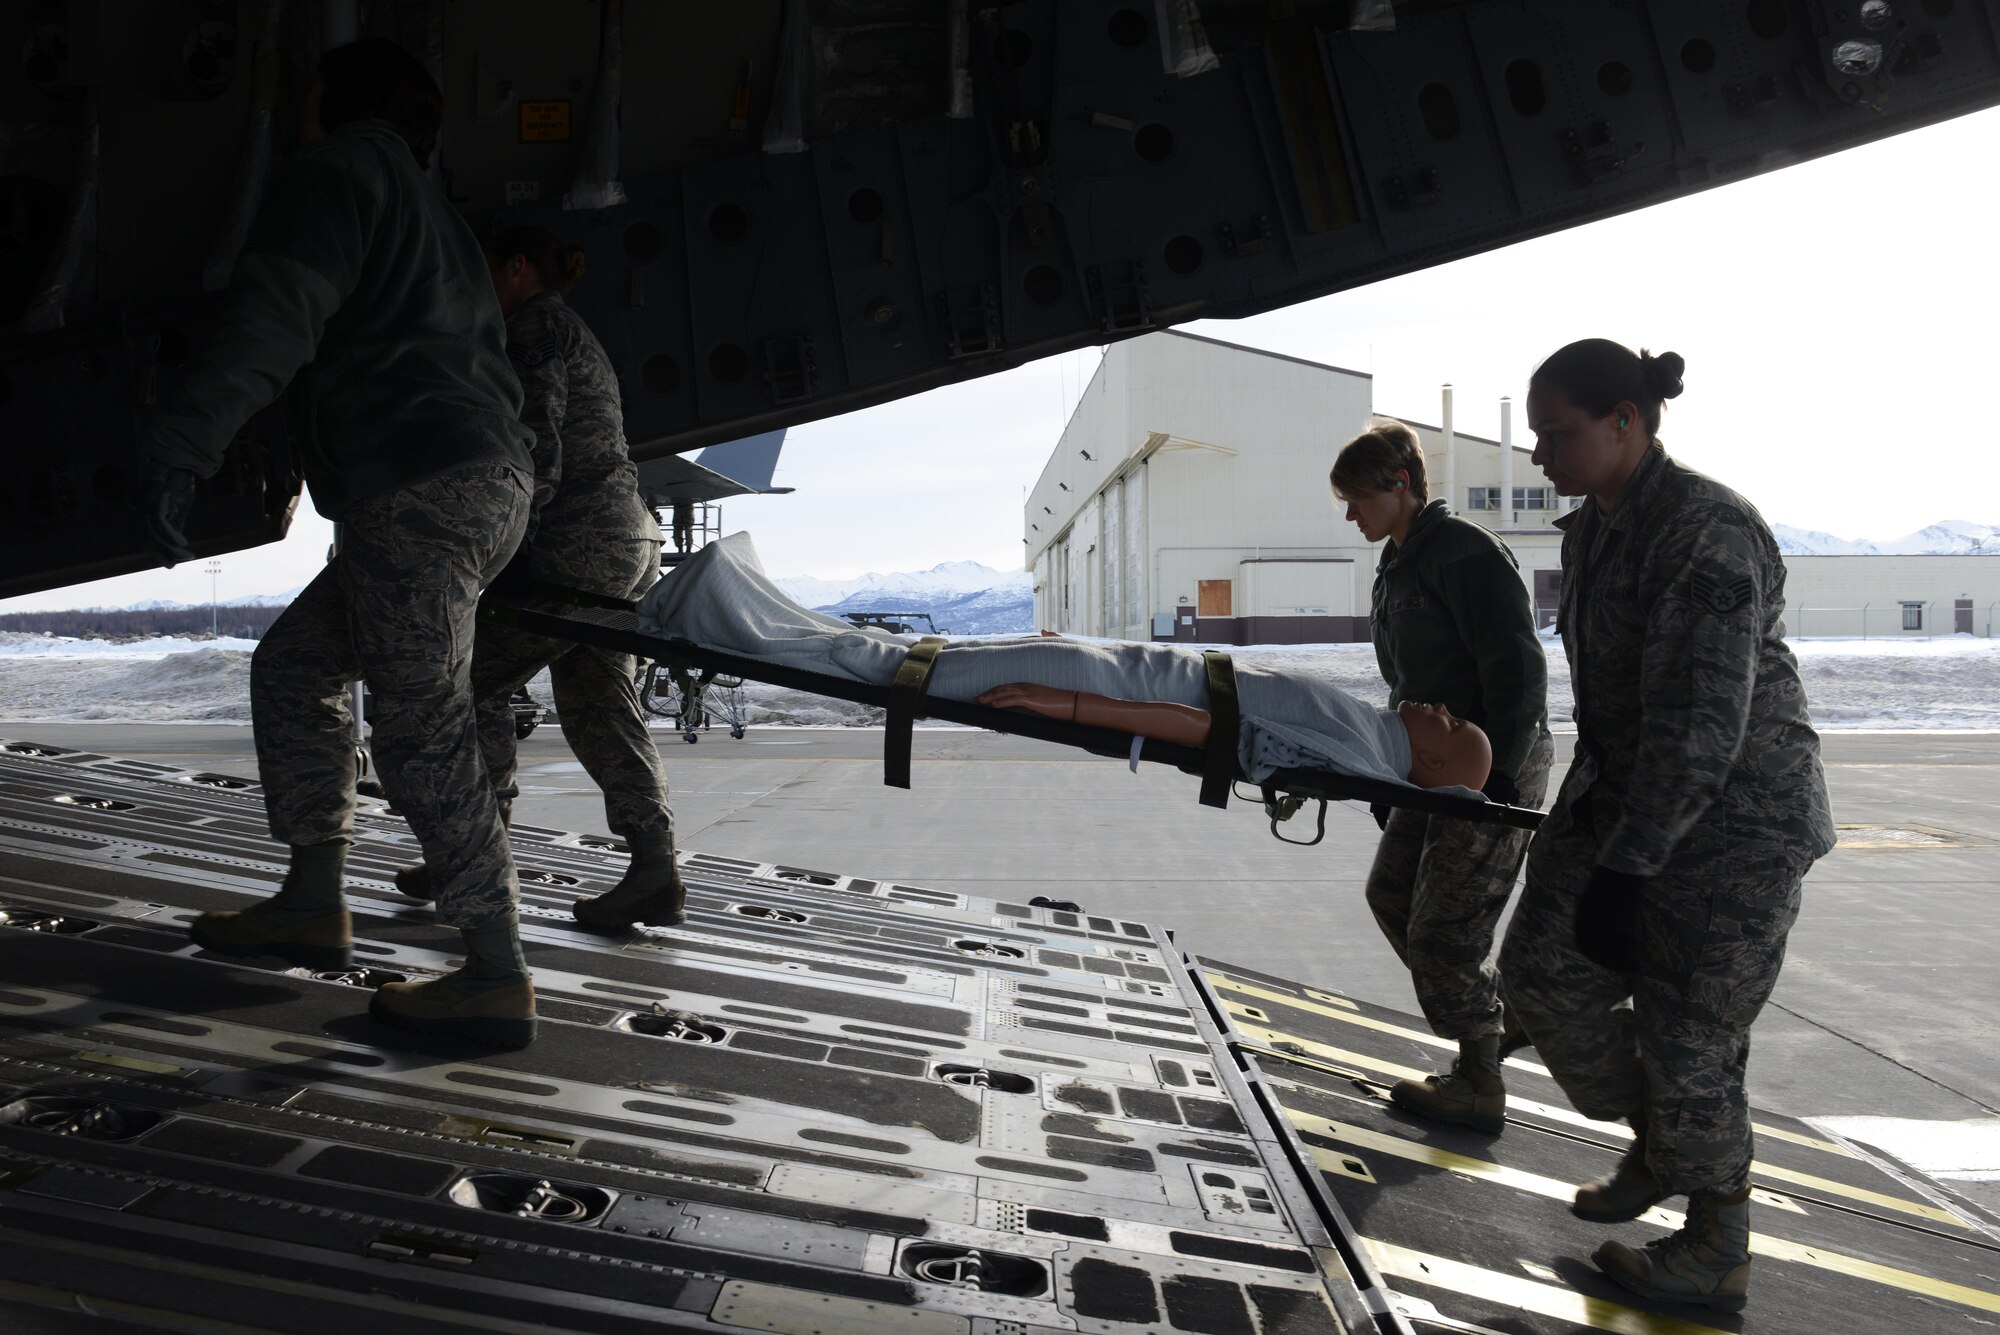 673d Medical Group Airmen transport a simulated patient from a bus into a C-17 Globemaster III during the EnRoute Patient Staging System exercise at Joint Base Elmendorf-Richardson, Alaska, April 3, 2017. The ERPSS provides patient reception and limited emergent intervention, and ensures patients are medically and administratively prepared for flight in a safe and timely aeromedical evacuation.